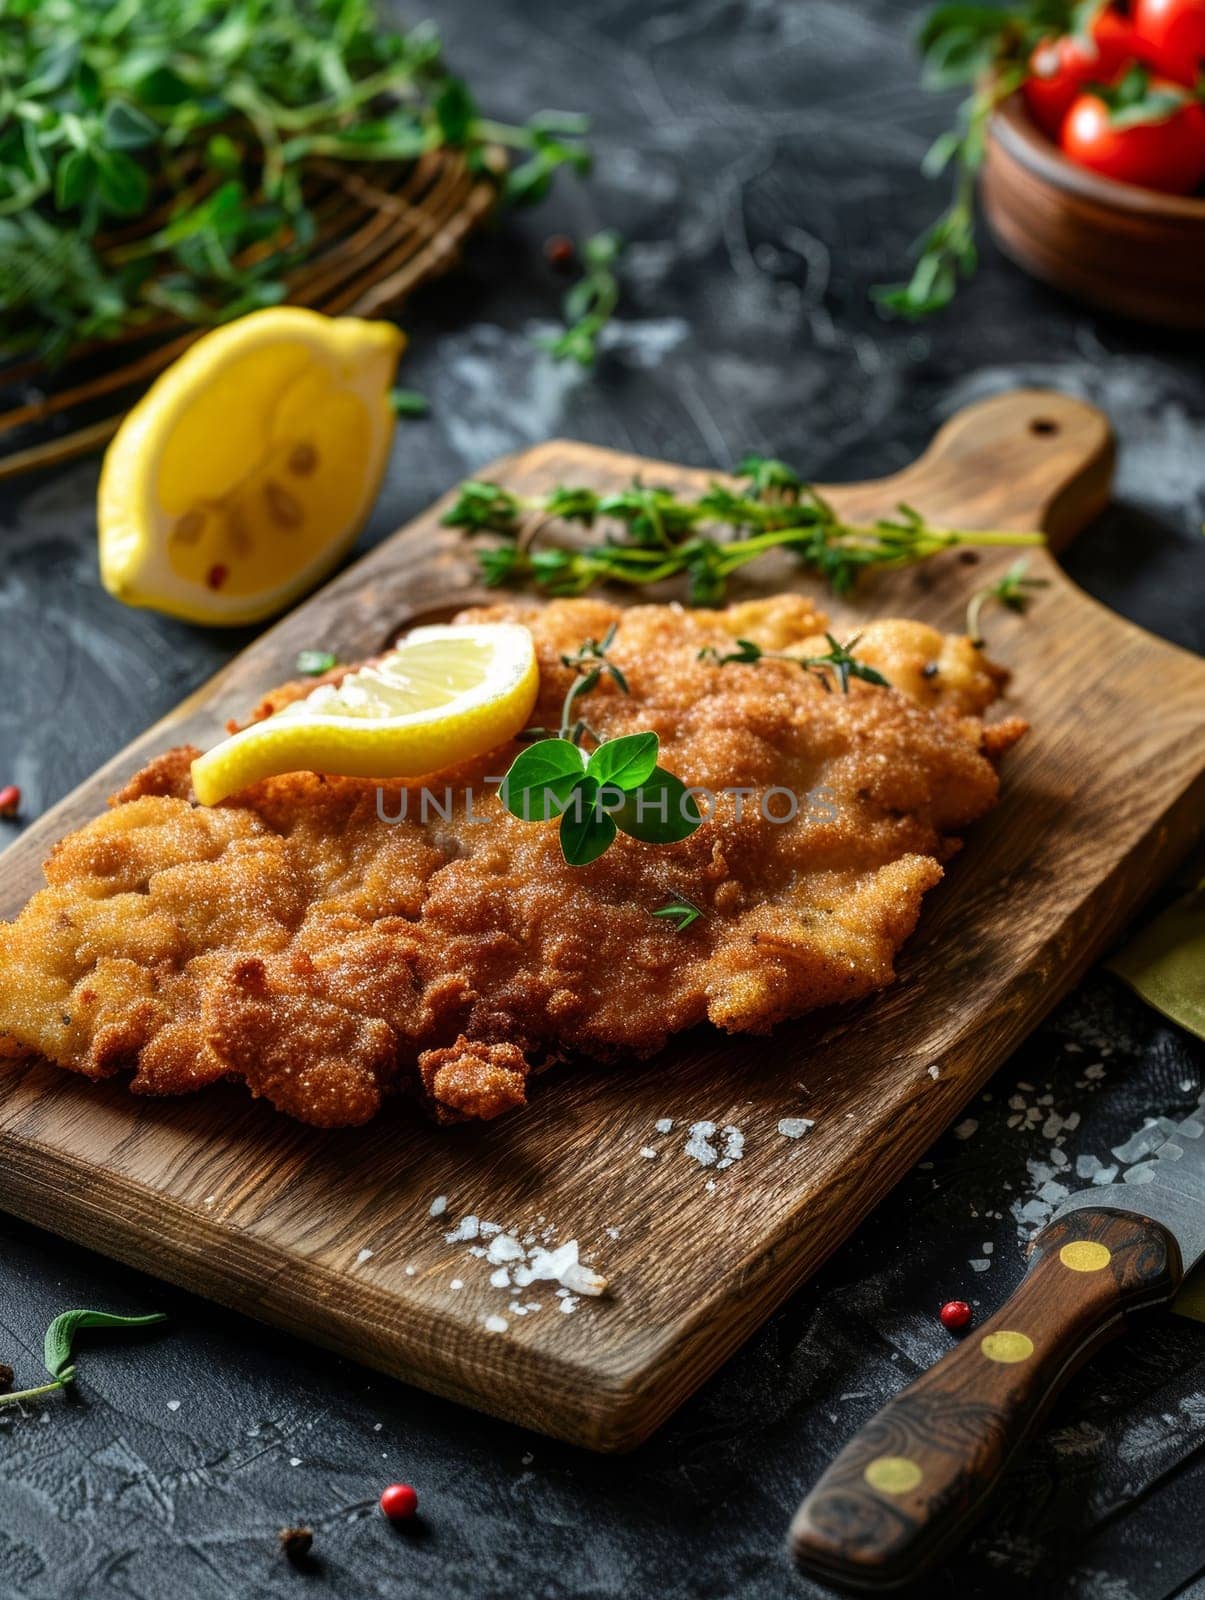 Classic German schnitzel, a tenderized pork cutlet that's breaded and fried to golden perfection, served on a rustic wooden cutting board with a fresh lemon wedge - a hearty traditional European dish. by sfinks